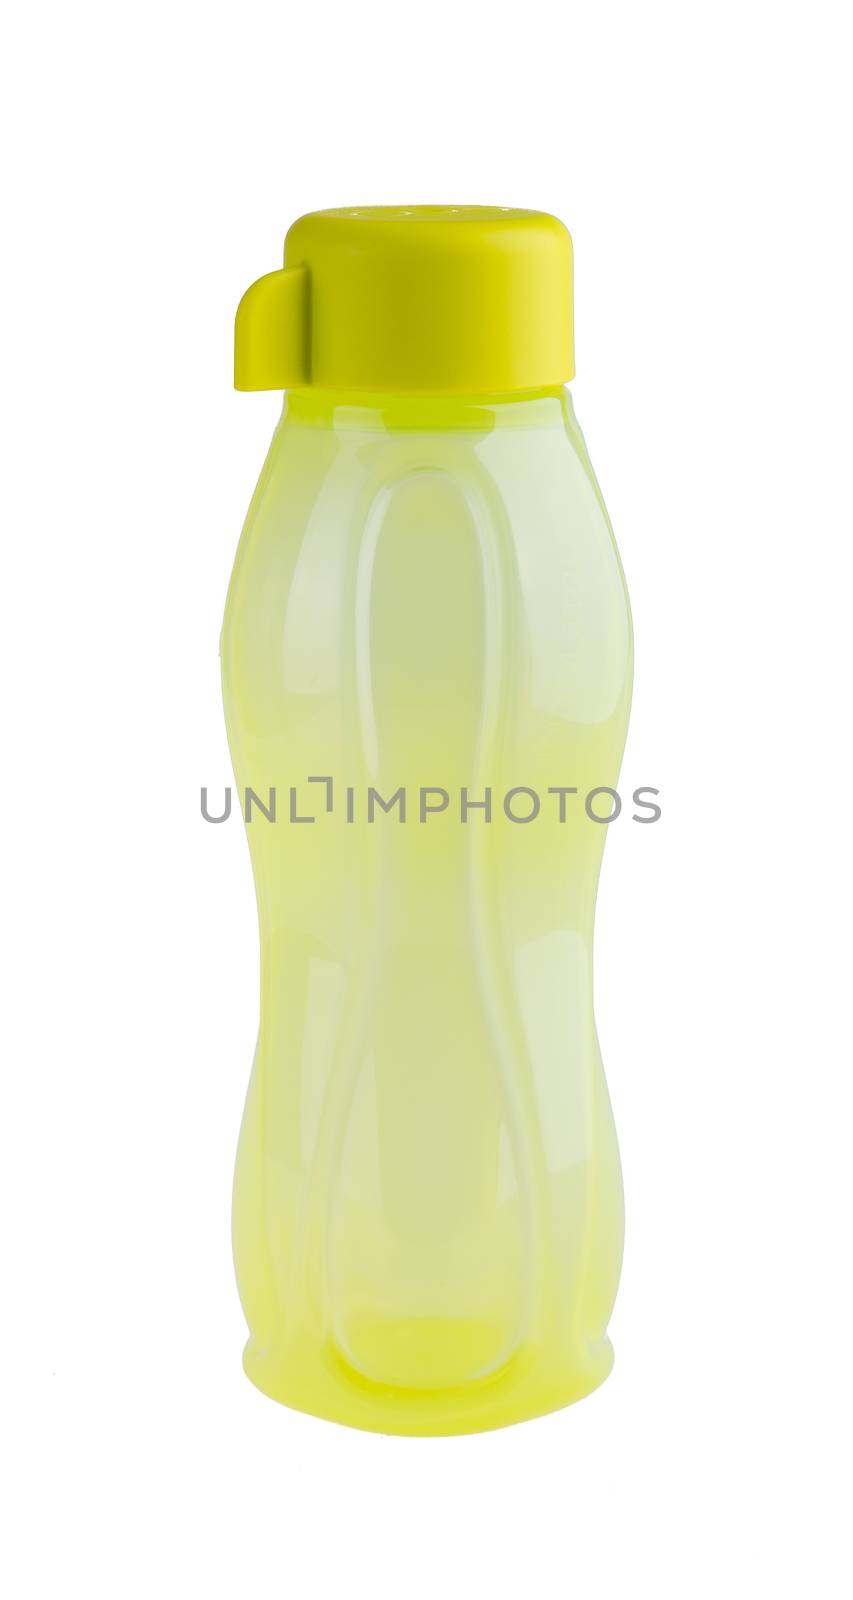 Colored plastic bottles isolated on white background